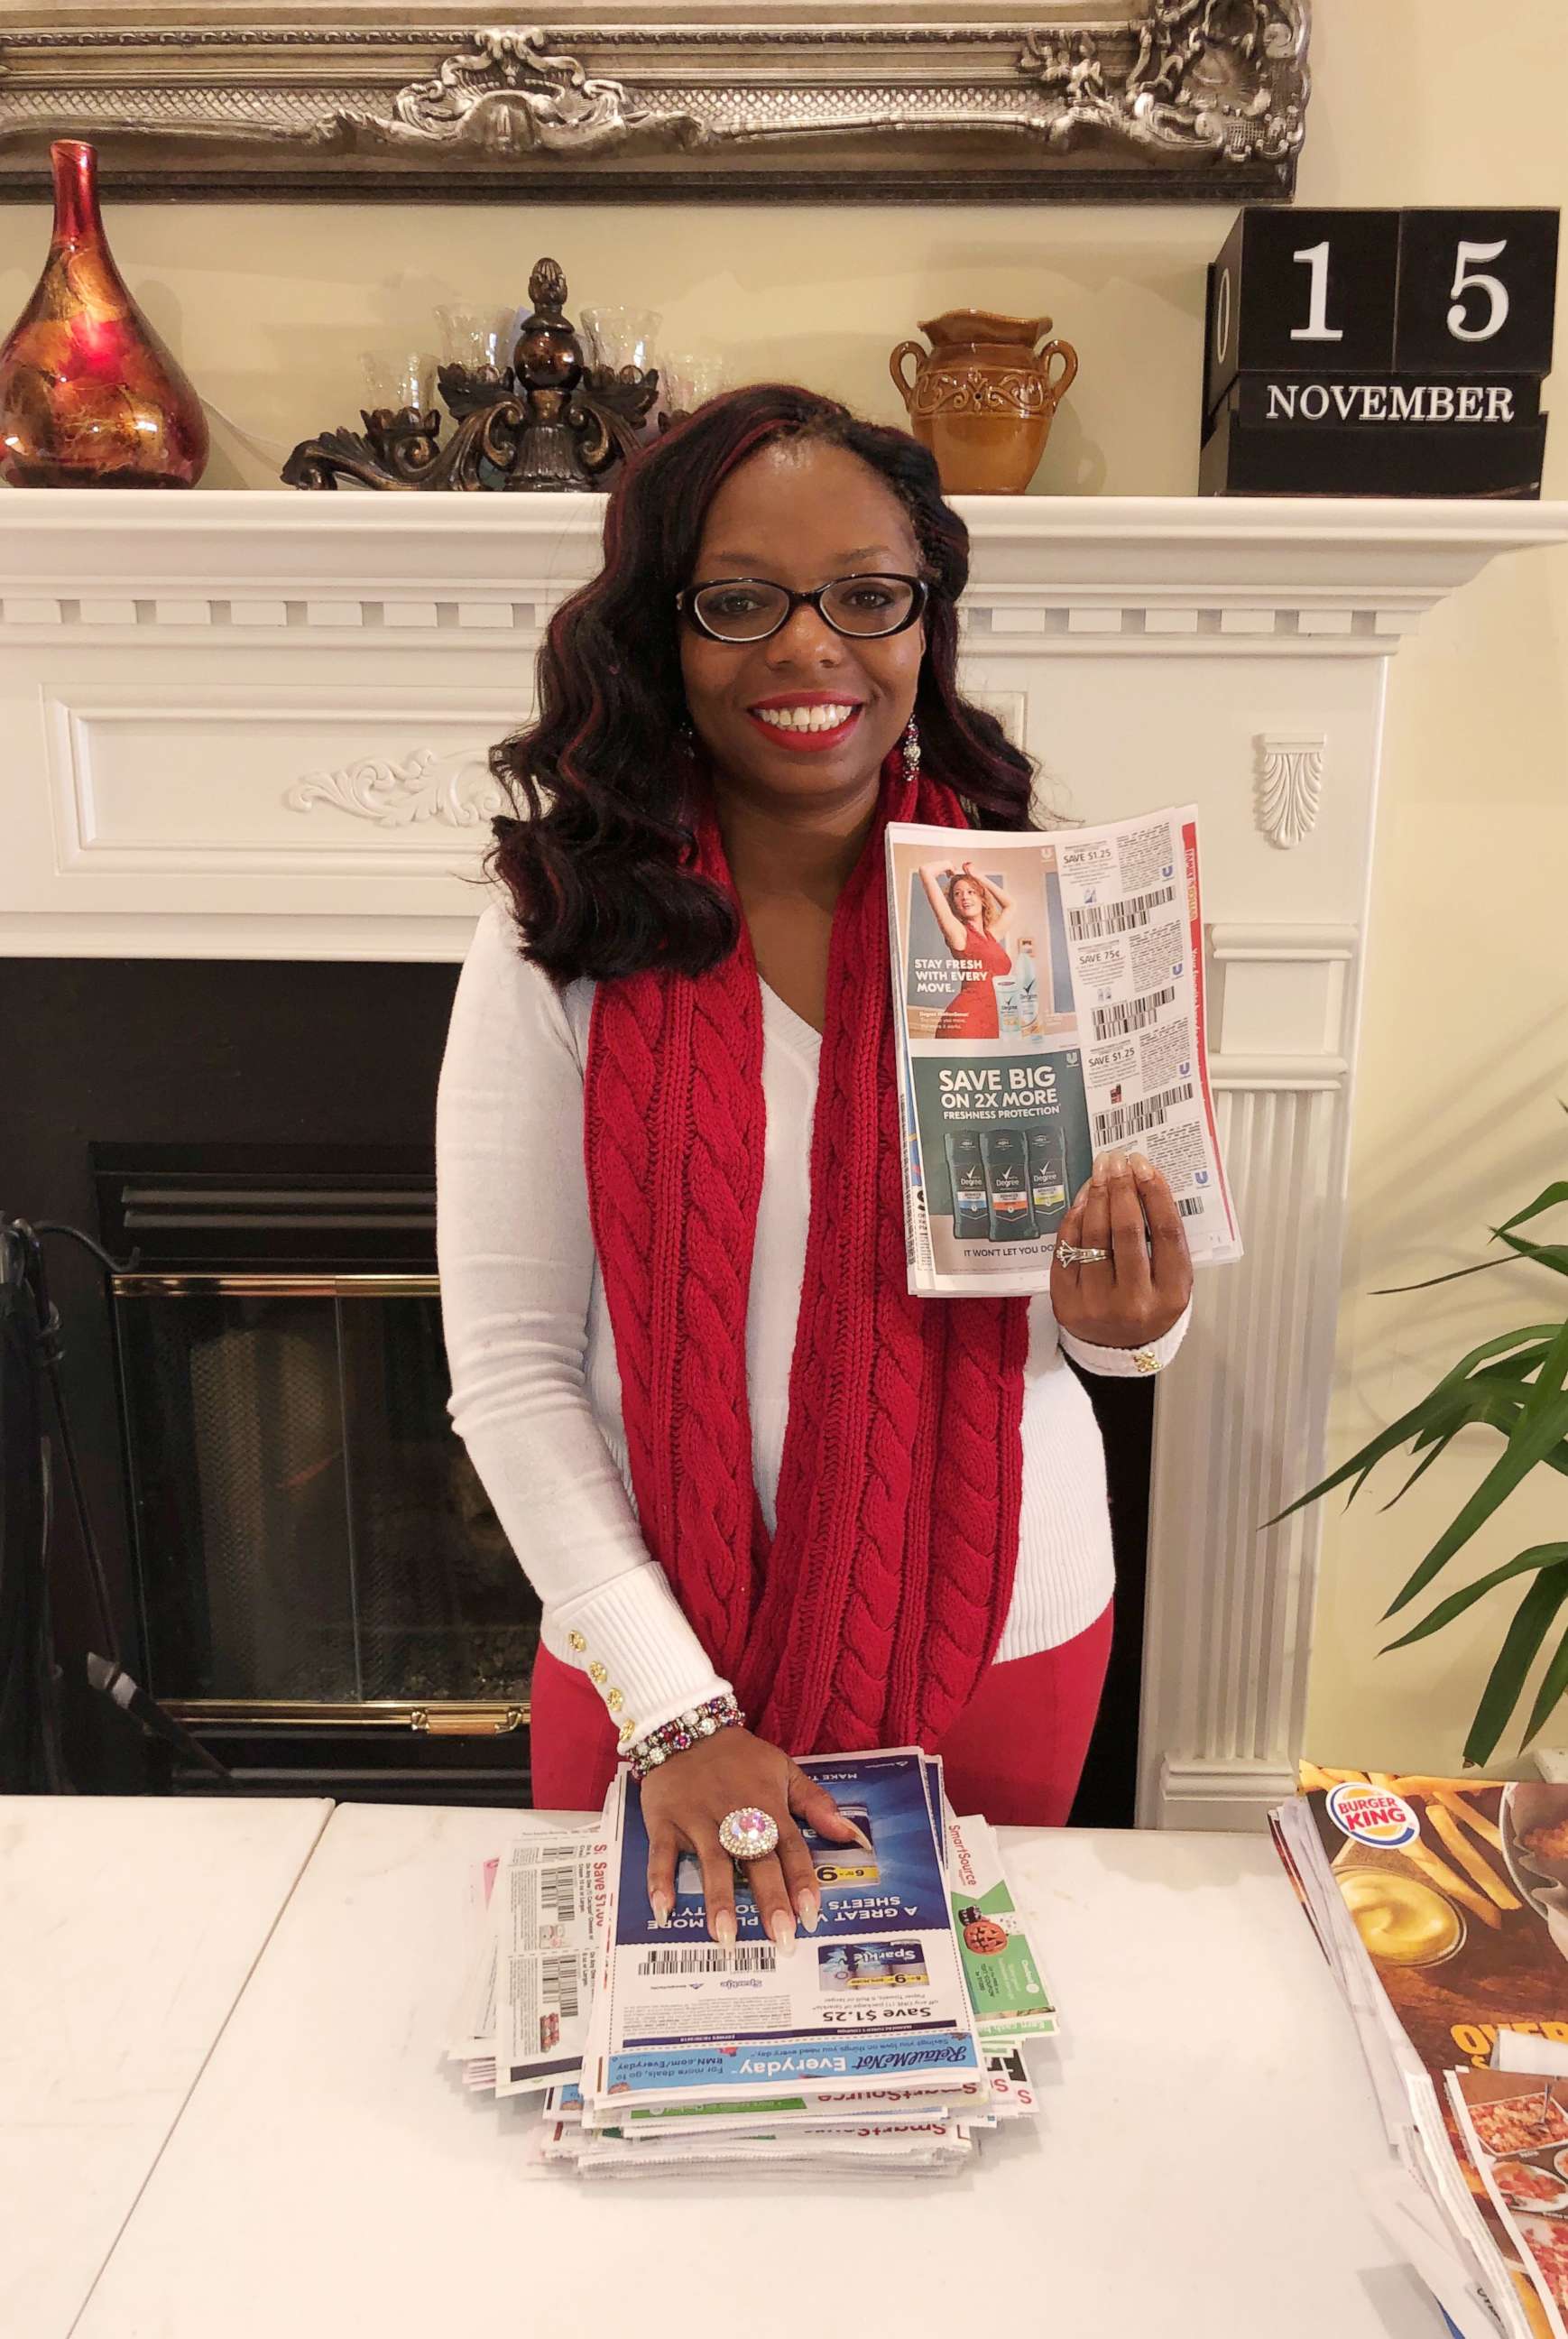 PHOTO: Latiaa Stewart, of Antioch, Tennessee, uses coupons to help provide care packages for homeless people.